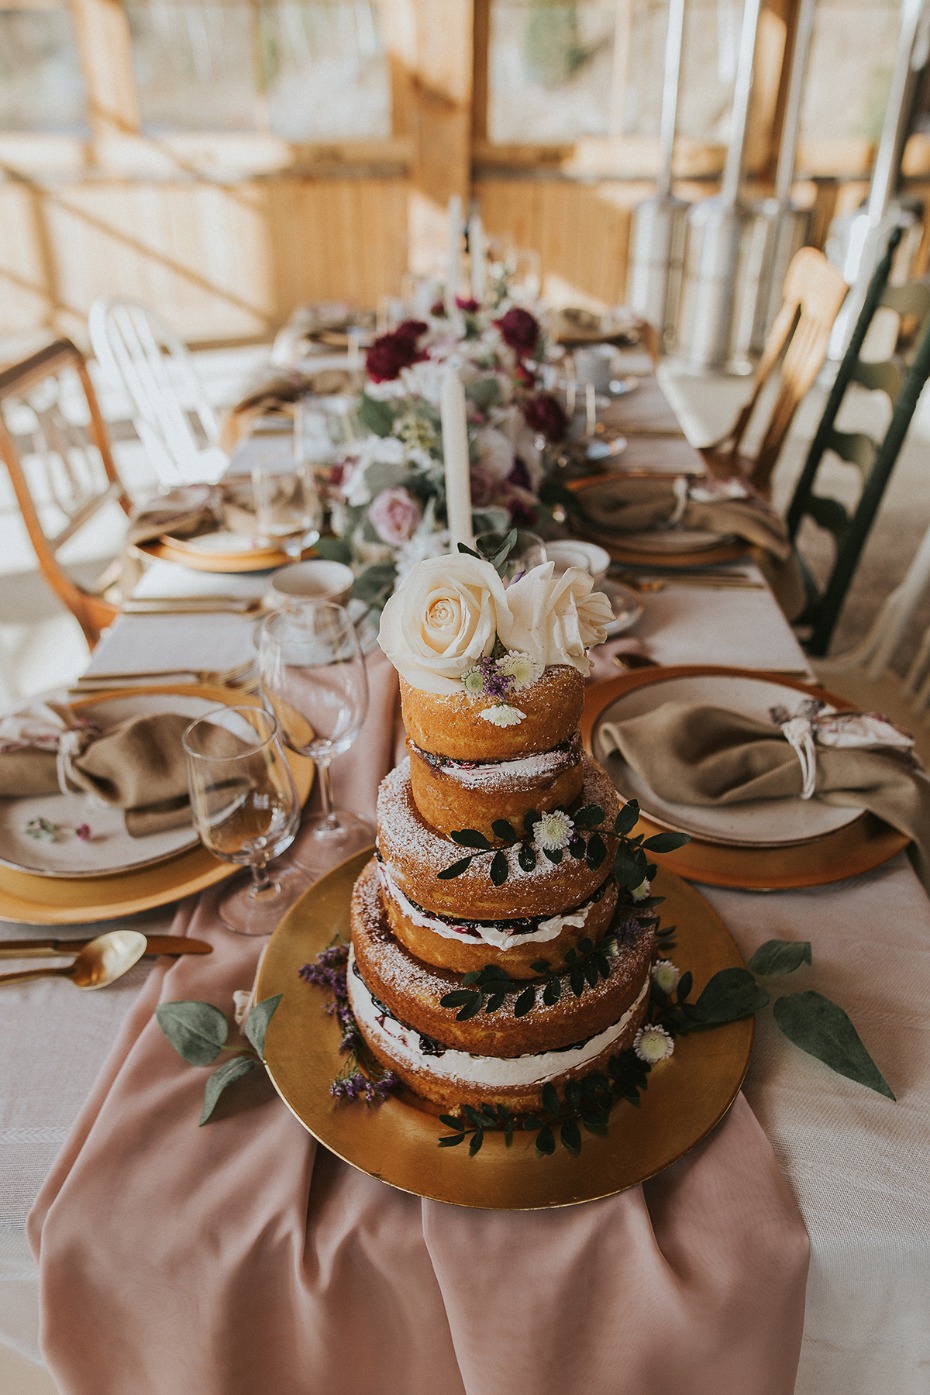 soft pink and gold wedding table decor